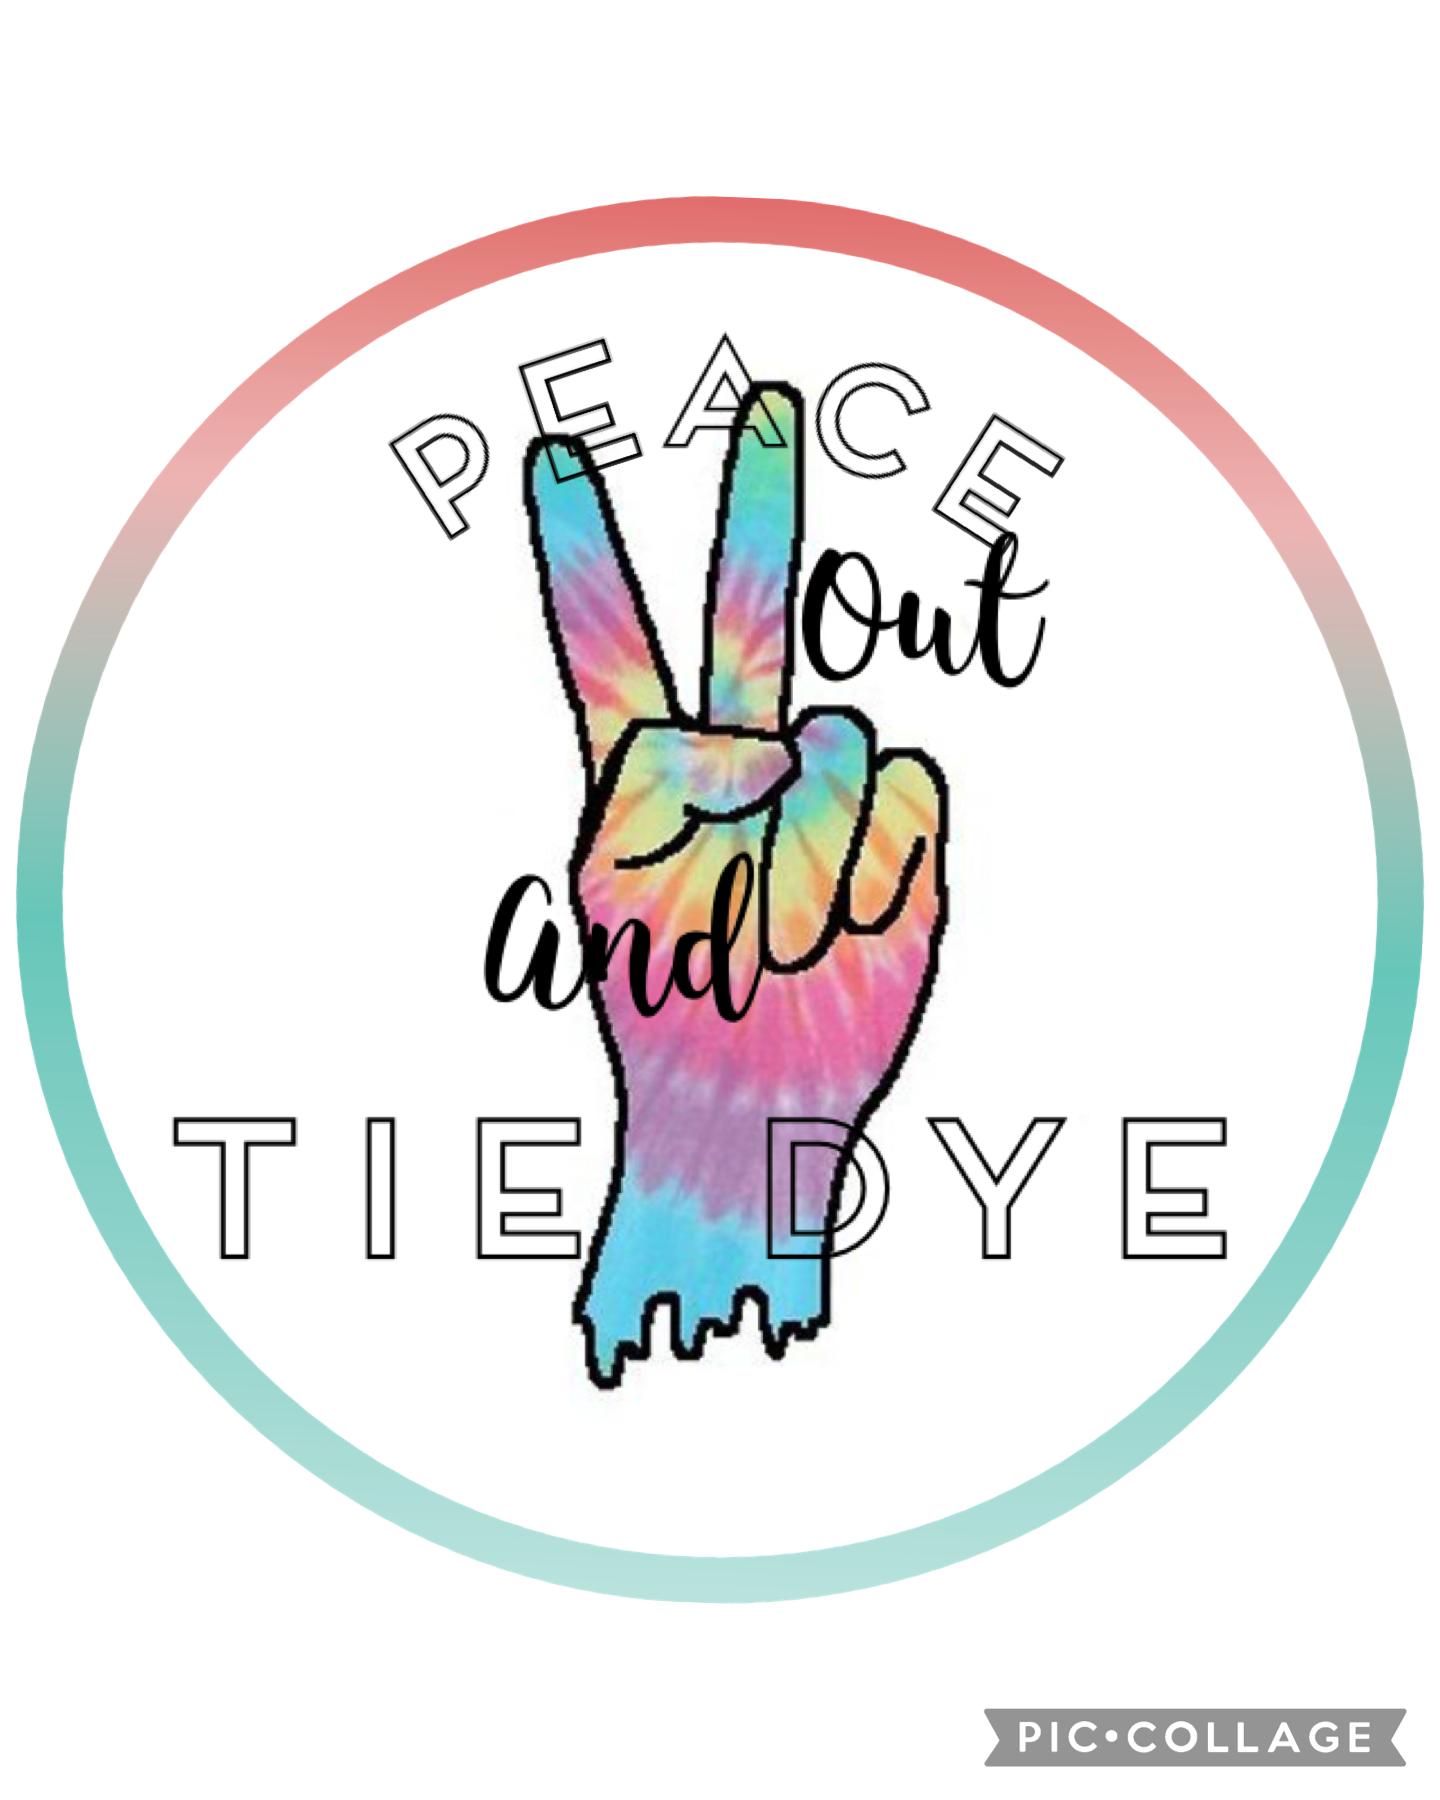 Peace out and tie dye ☮️ ✌🏻 !!!😝